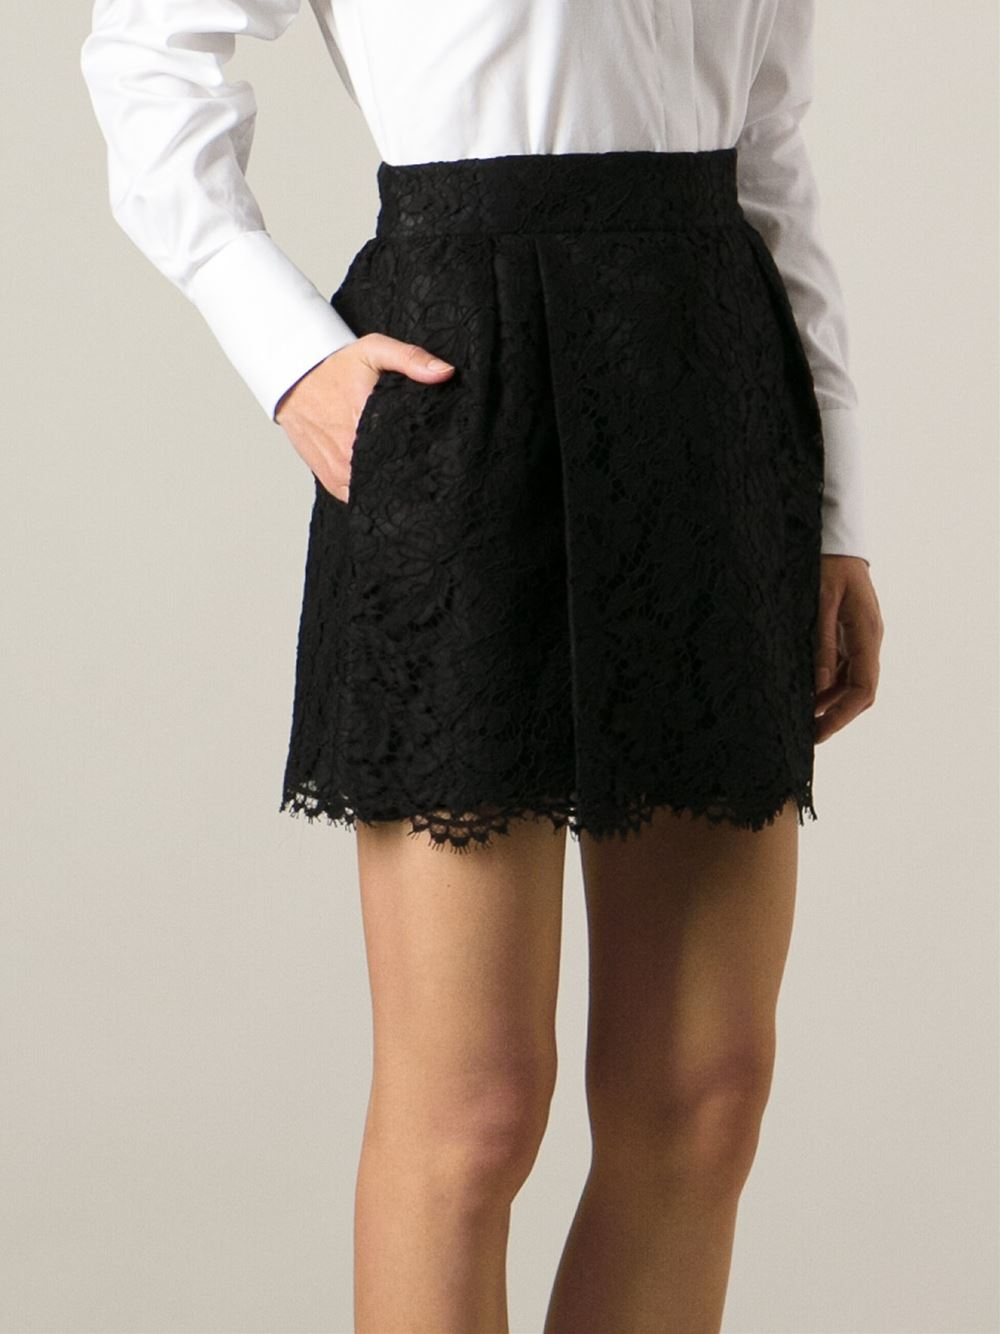 Lyst - Valentino Lace Skirt in Black